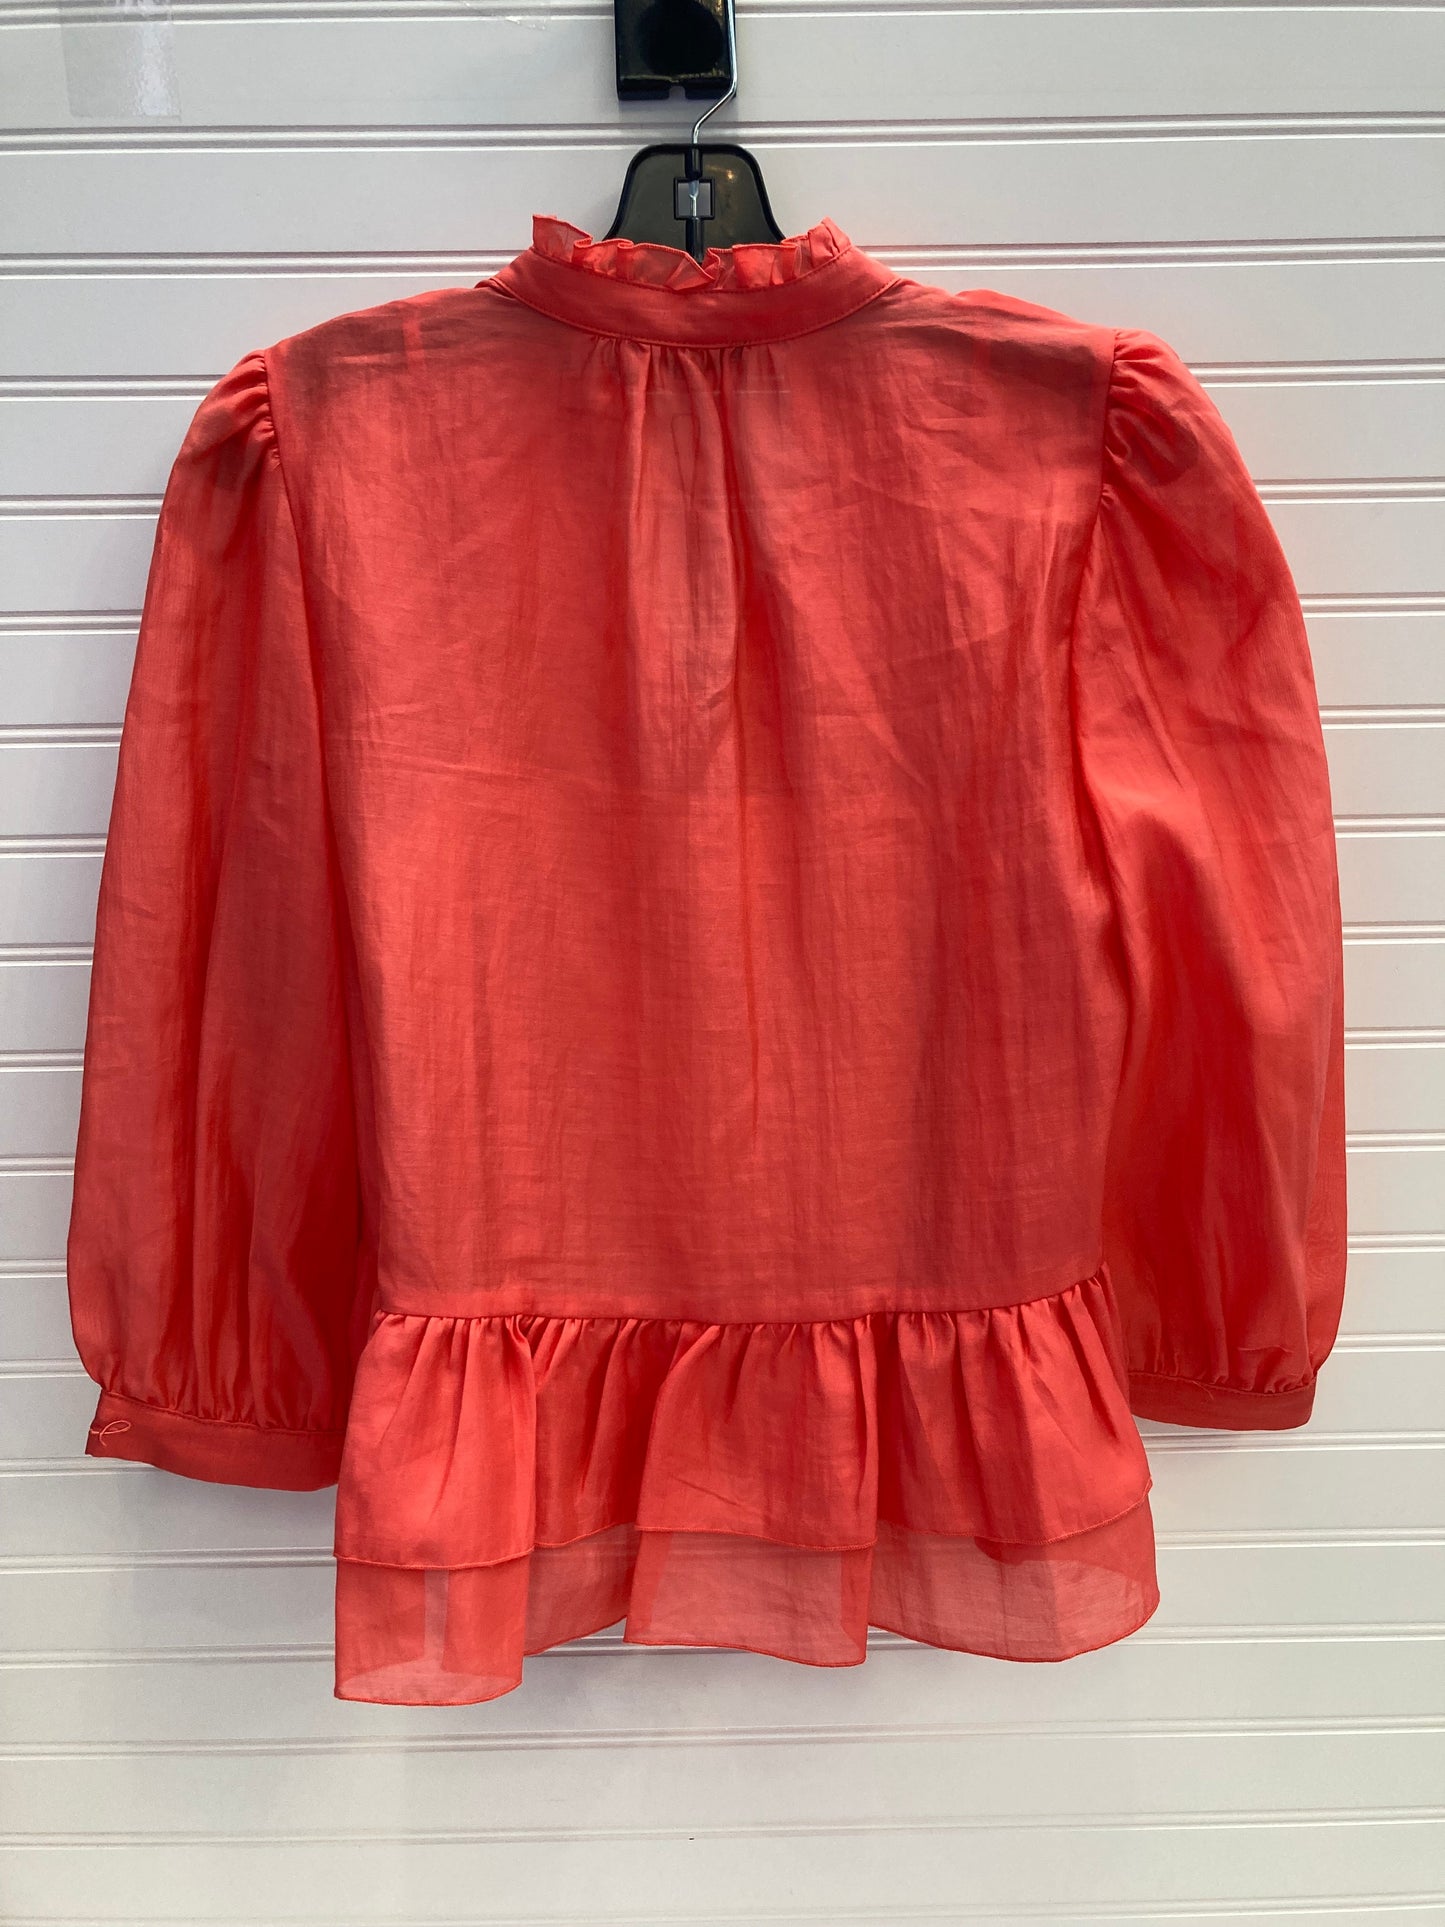 Red Top 2pc 3/4 Sleeve Karl Lagerfeld, Size Xs